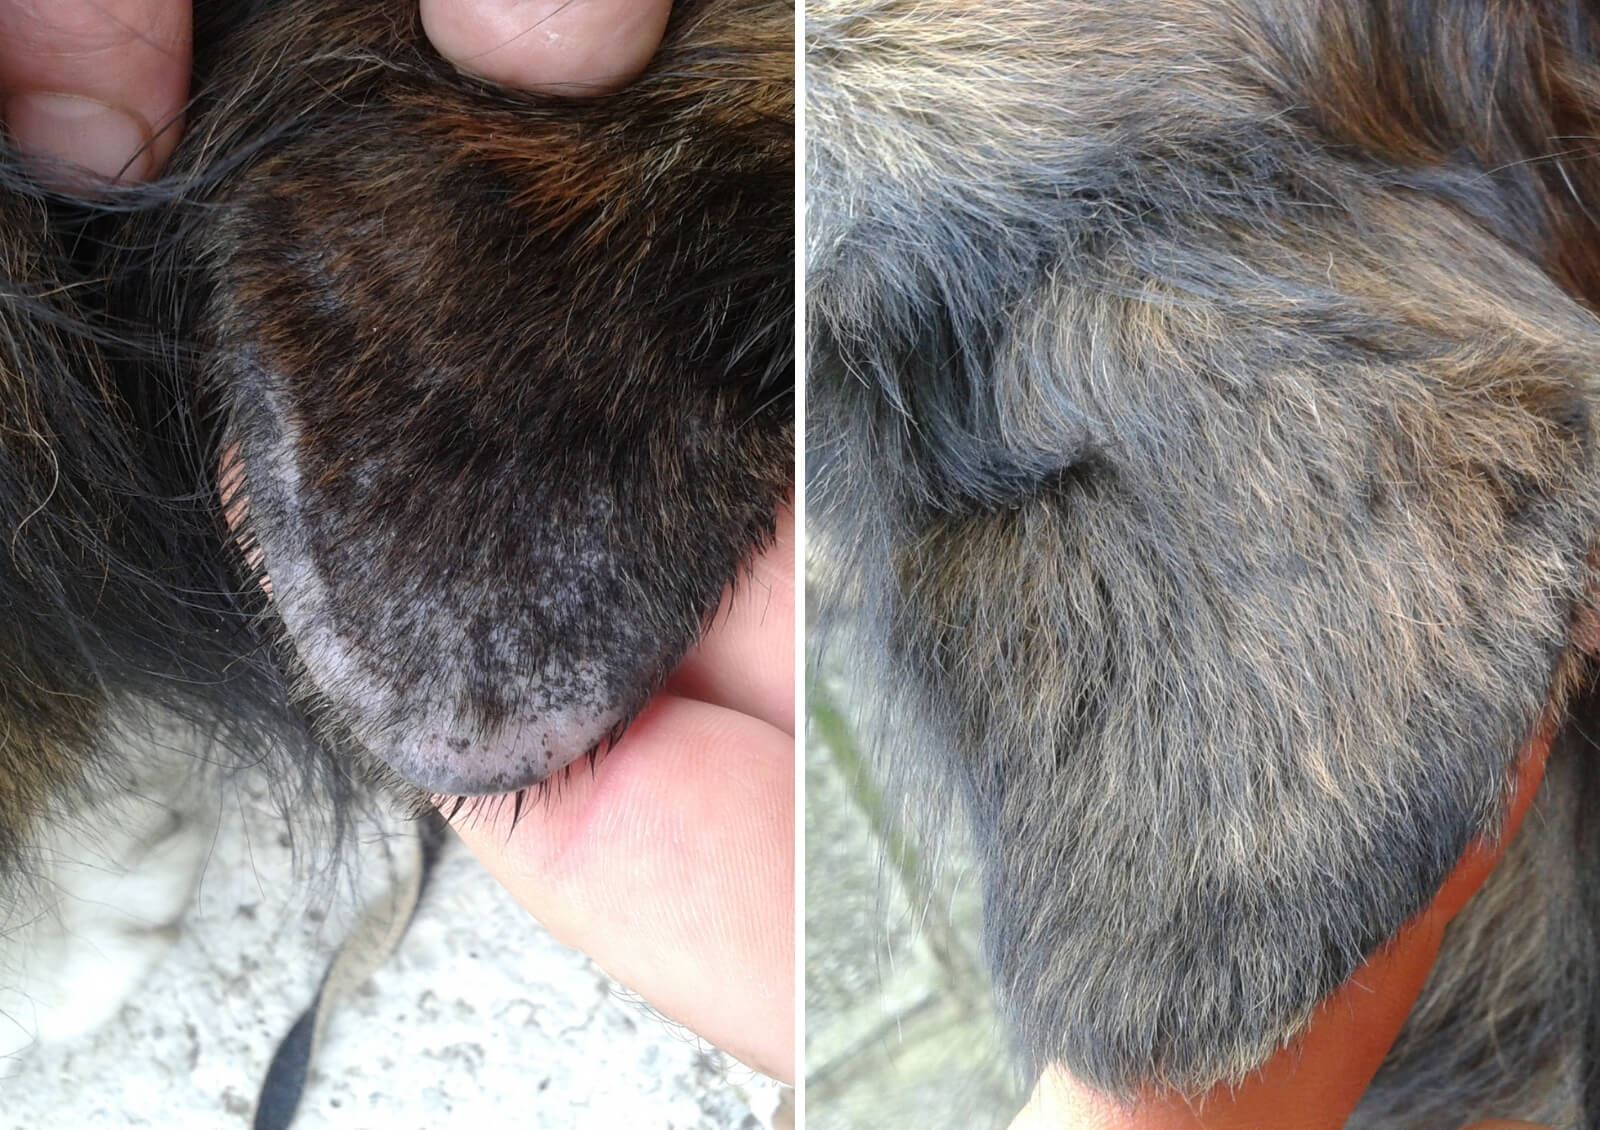 Scratched and bleeding dog ear without hair and after treating with healing balm